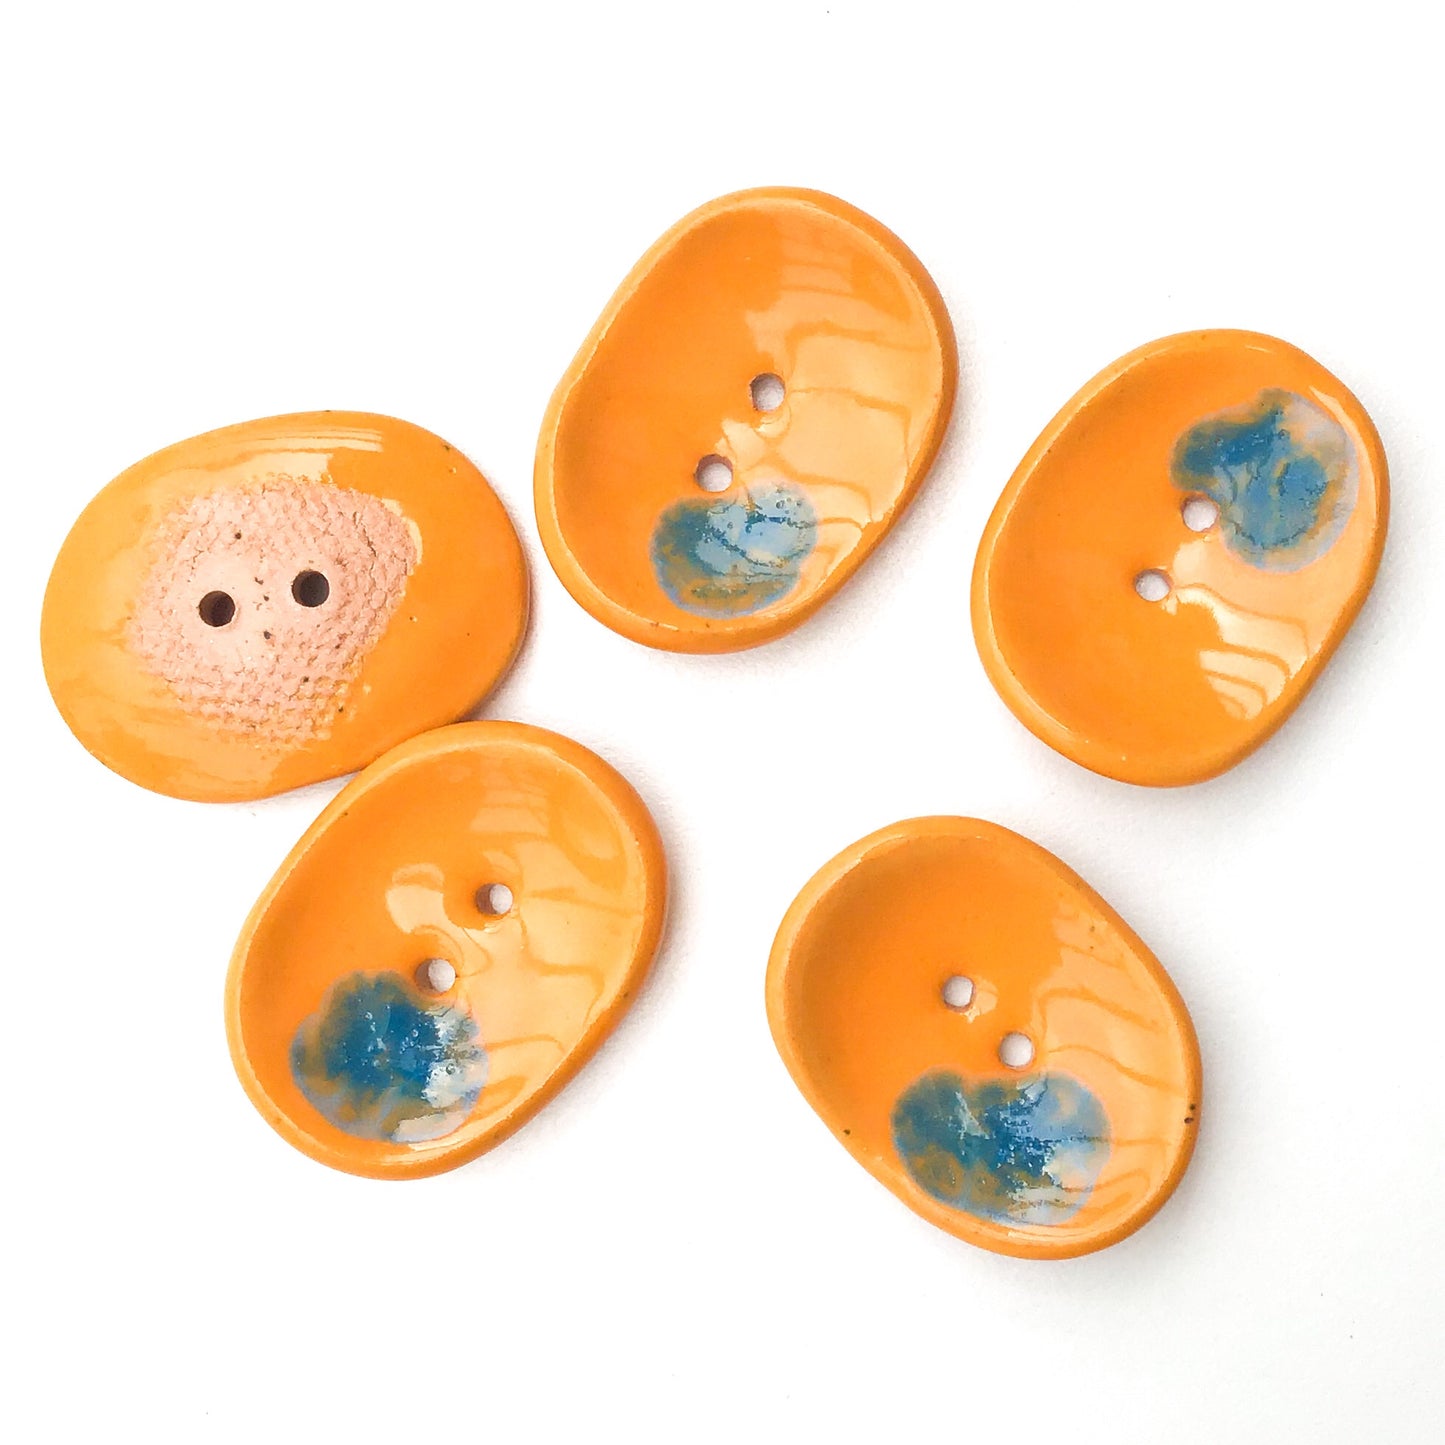 Decorative Ceramic Button with Shimmery Color Drips - Orange - Blue - Oval Clay Button - 1" x 1 1/4"